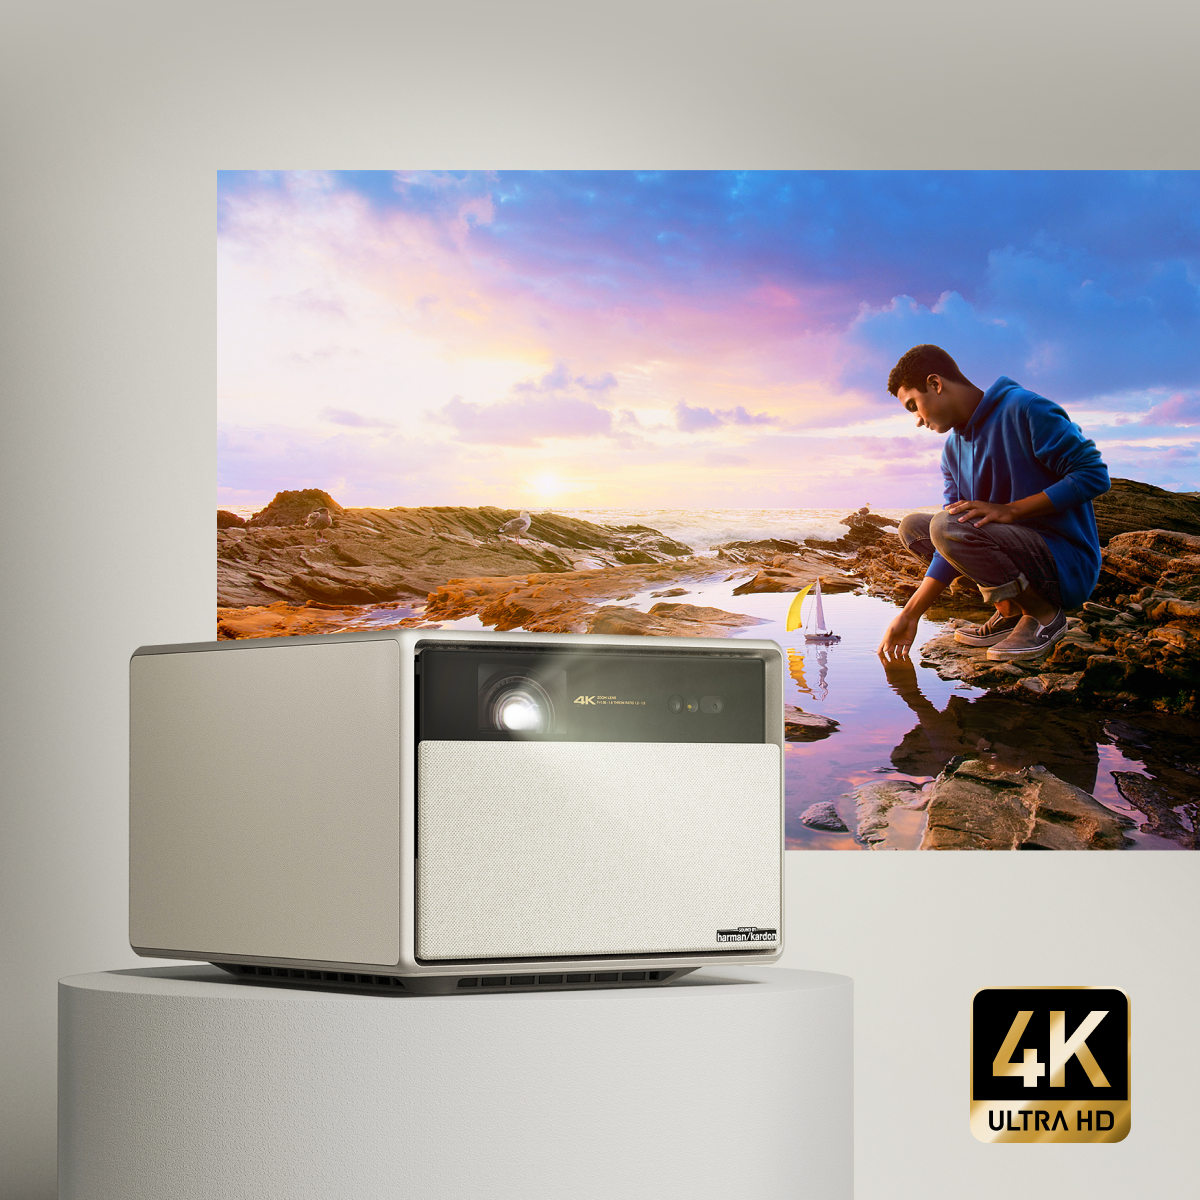 Why You Need A 4K Projector with Dolby Vision